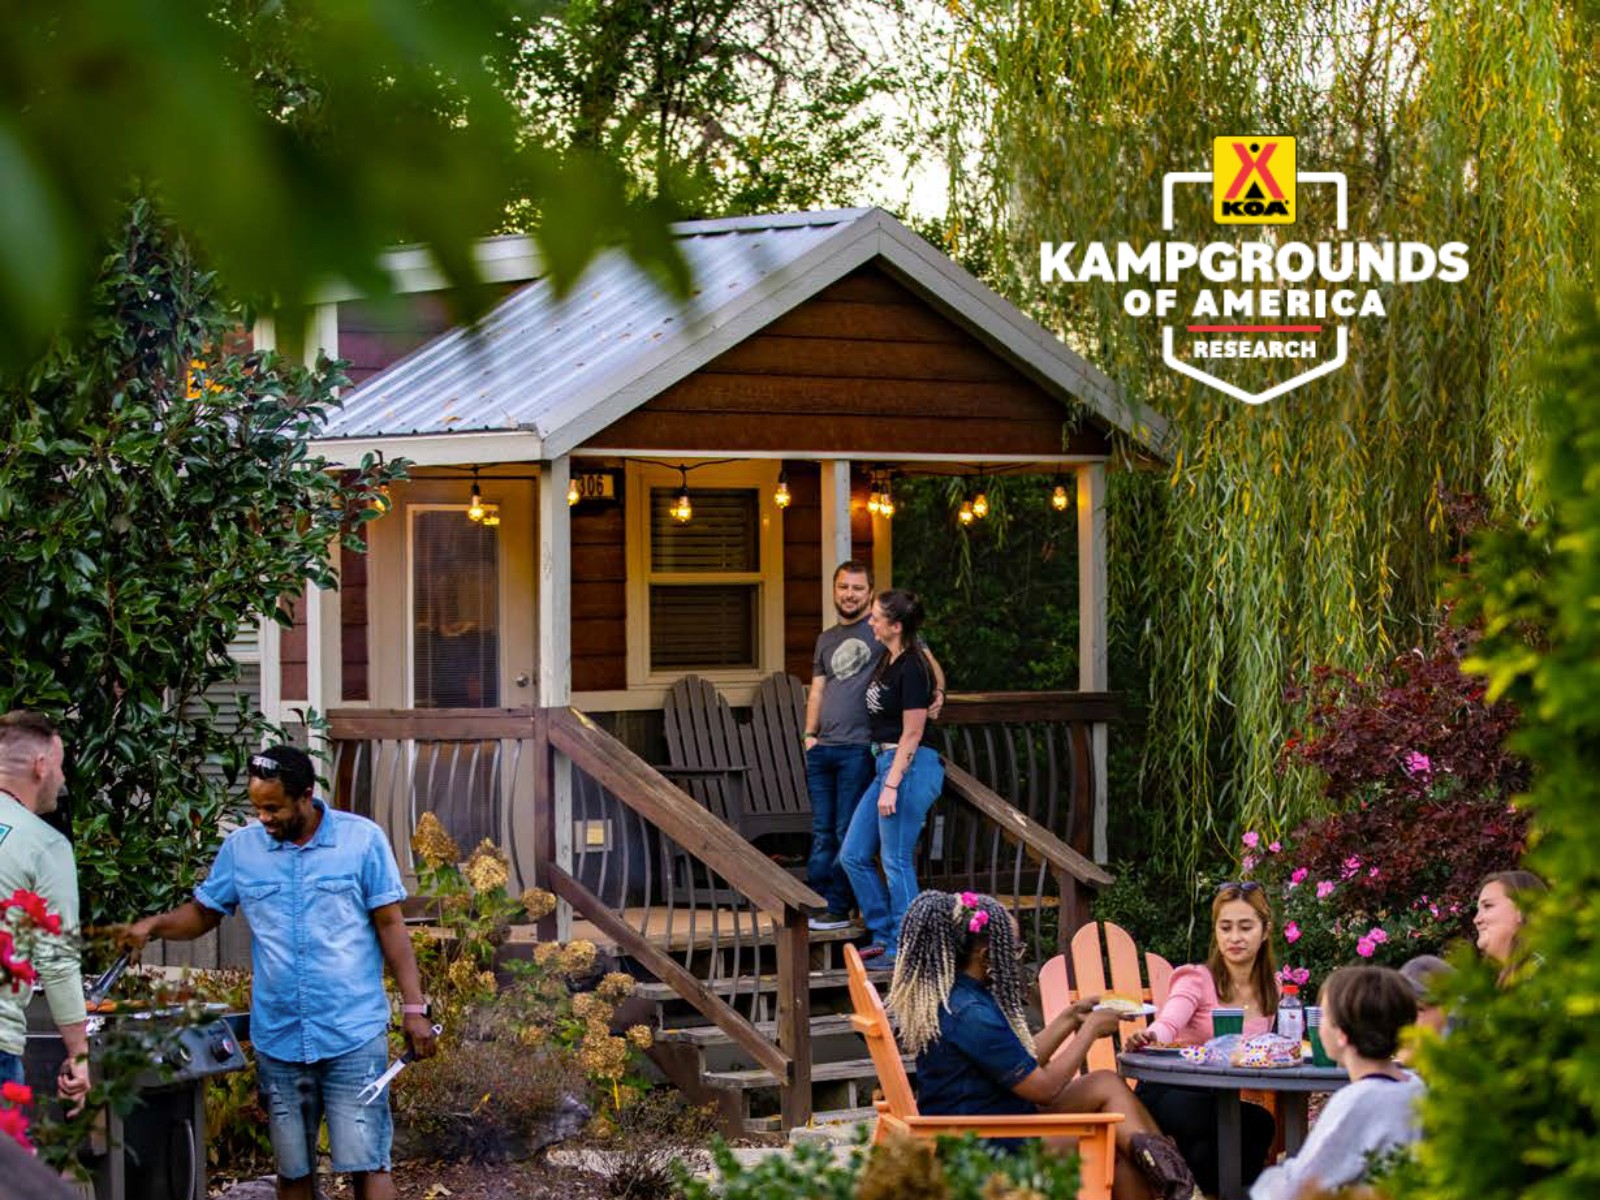 NORTH AMERICAN CAMPING & OUTDOOR HOSPITALITY REPORT 2023 The Ninth Annual Survey of the General Population Conducted by Cairn Consulting Group | Sponsored by Kampgrounds of America, Inc.